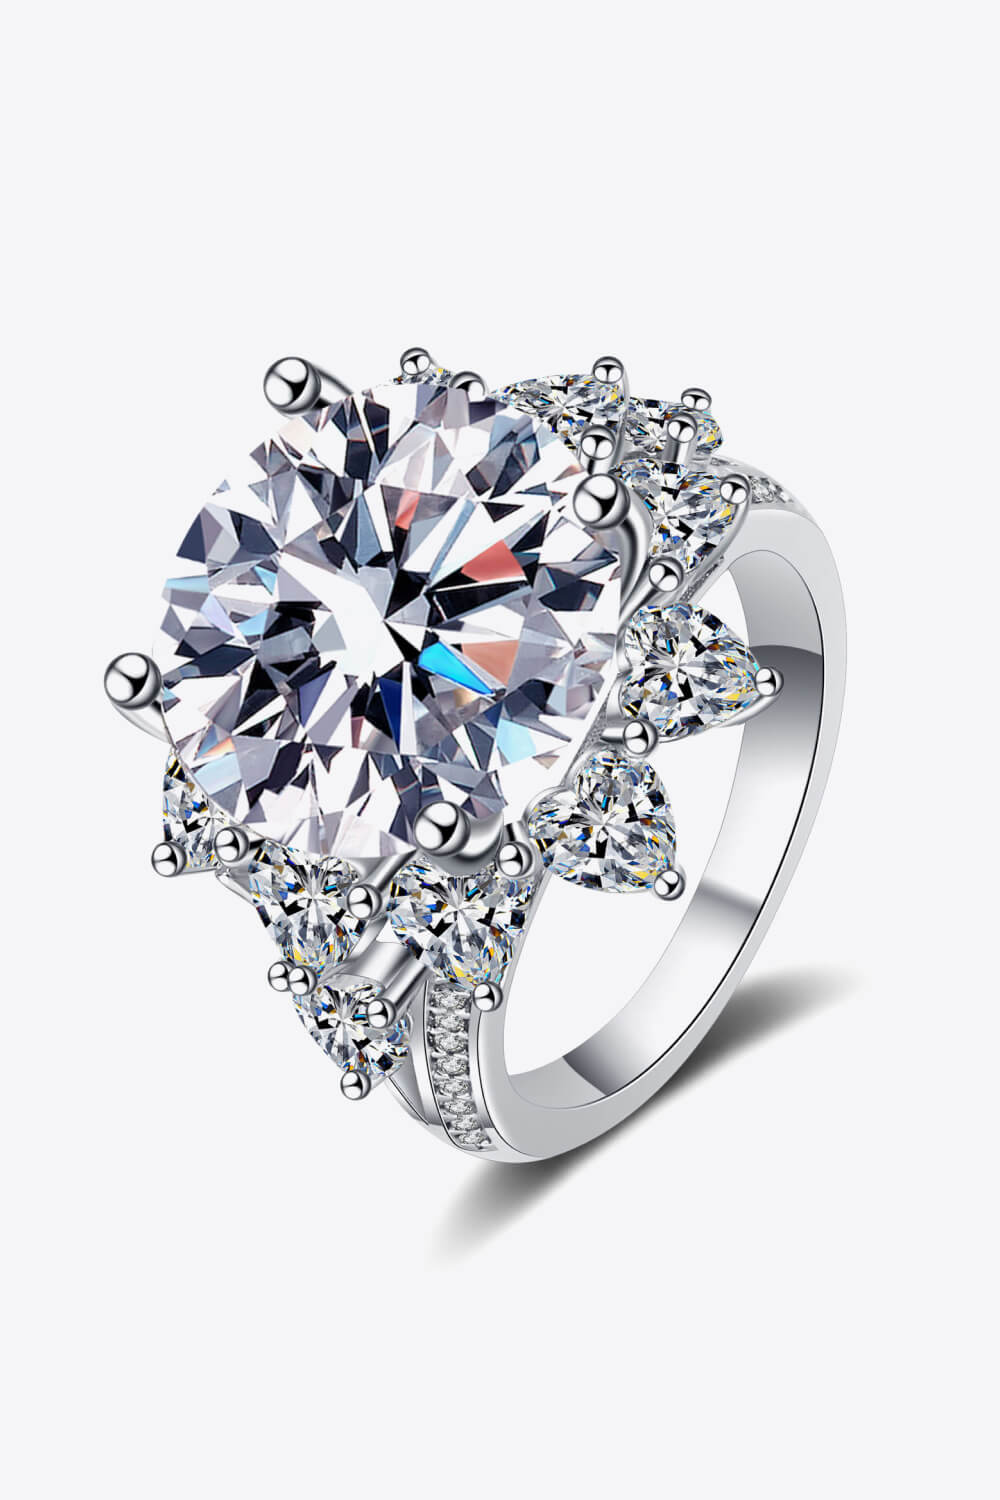 10 Carat Moissanite Flower-Shaped Ring-Rings-Inspired by Justeen-Women's Clothing Boutique in Chicago, Illinois